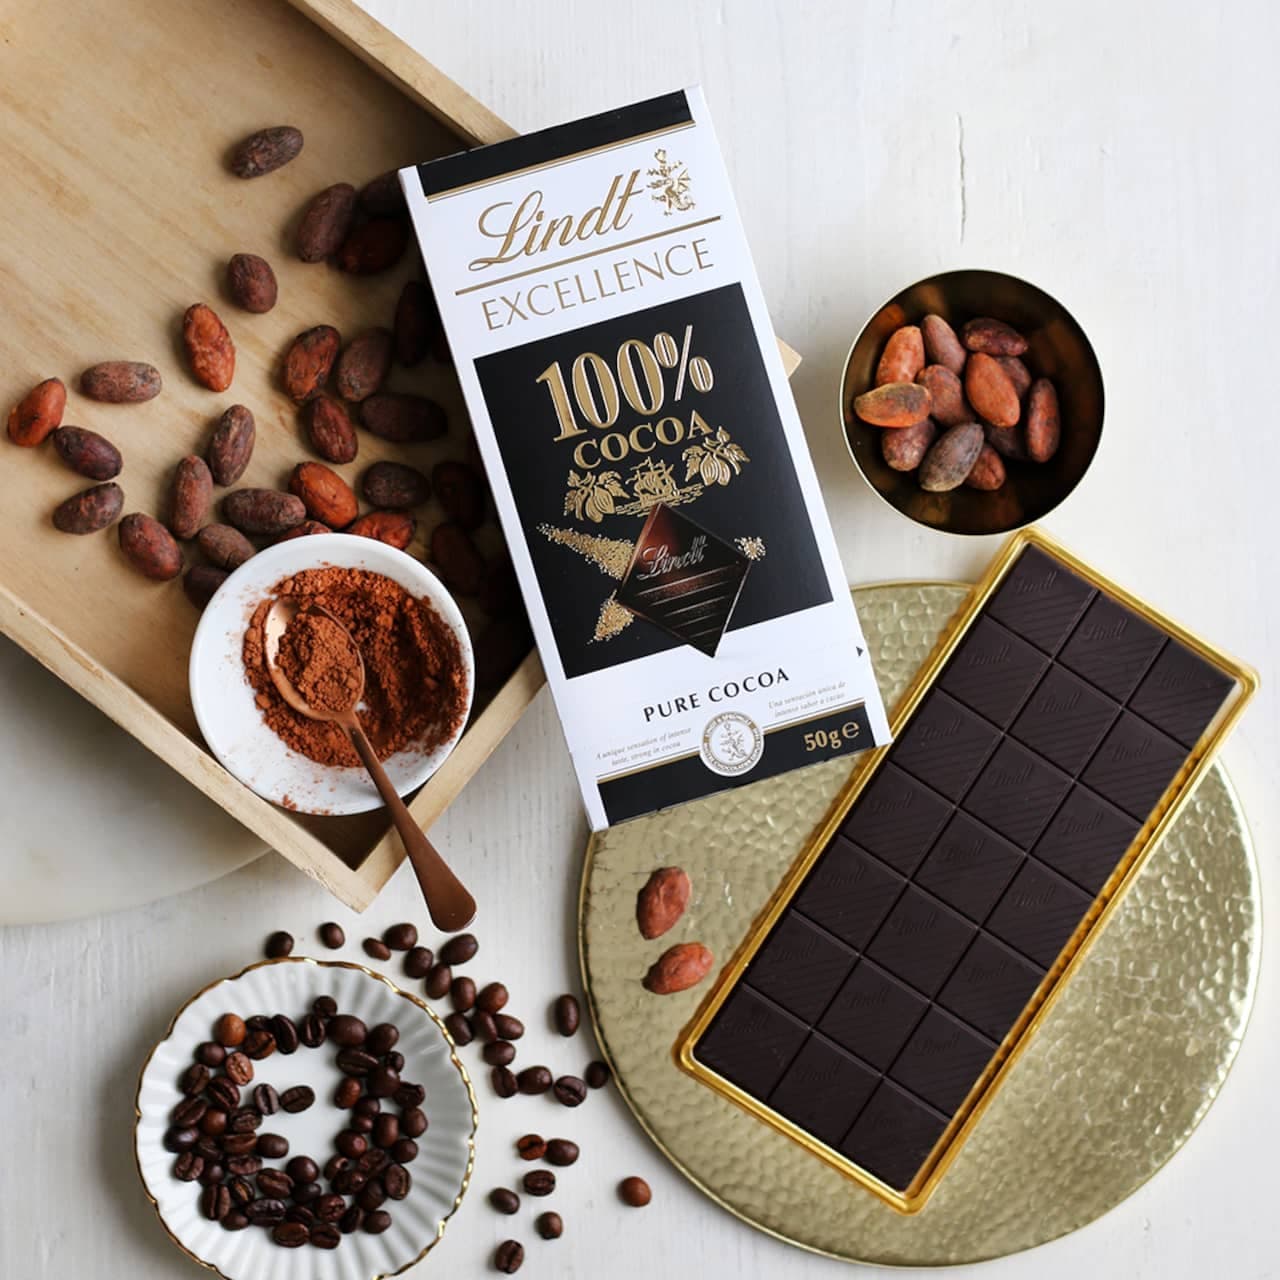 Lindt "Excellence 100% Cacao